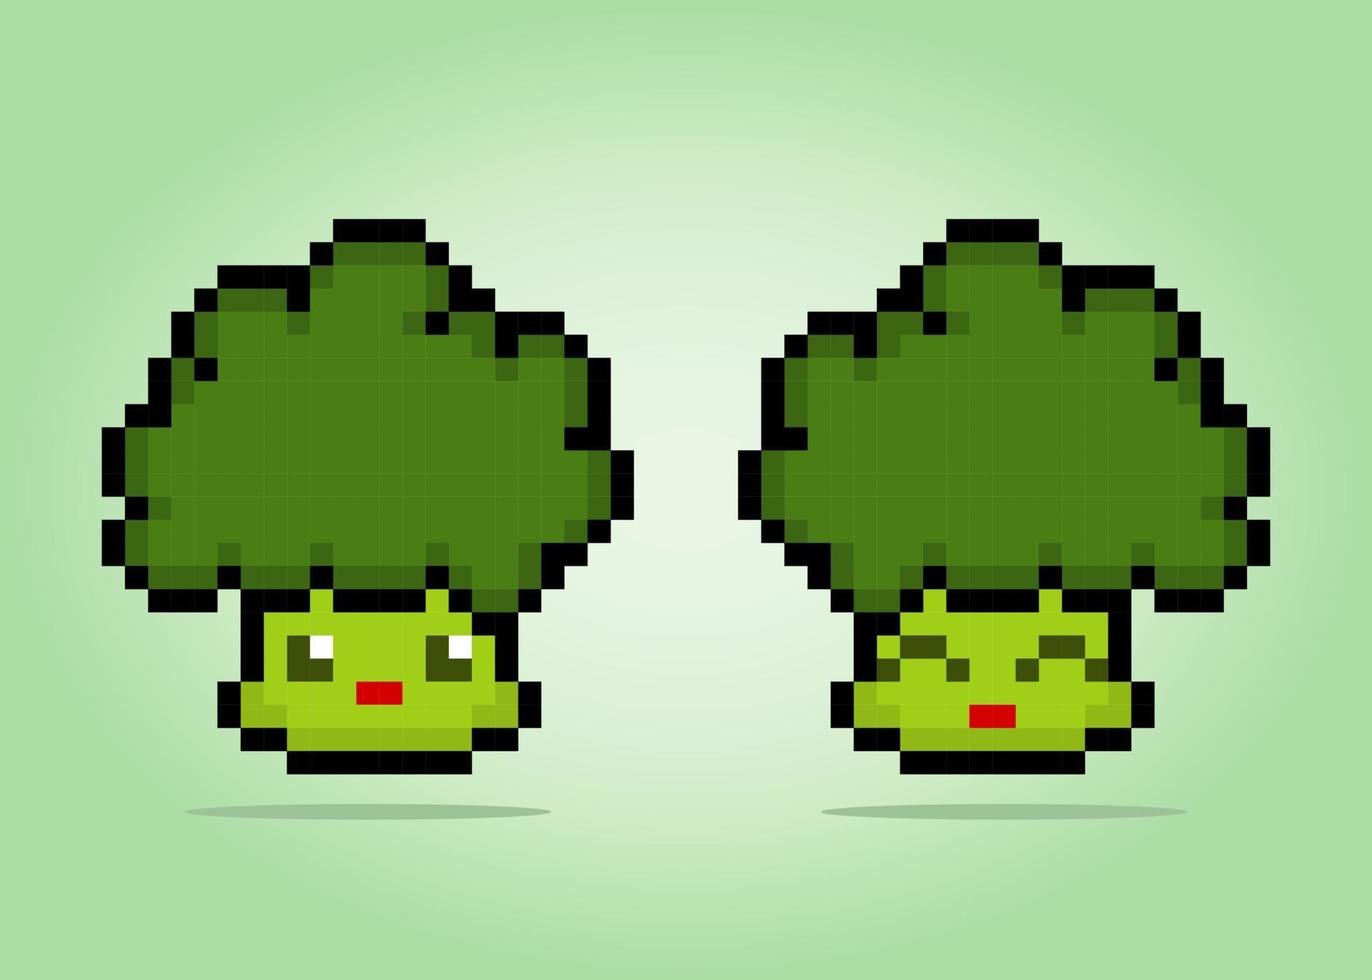 8 bit pixel broccoli characters. Vegetable game assets in vector illustrations.